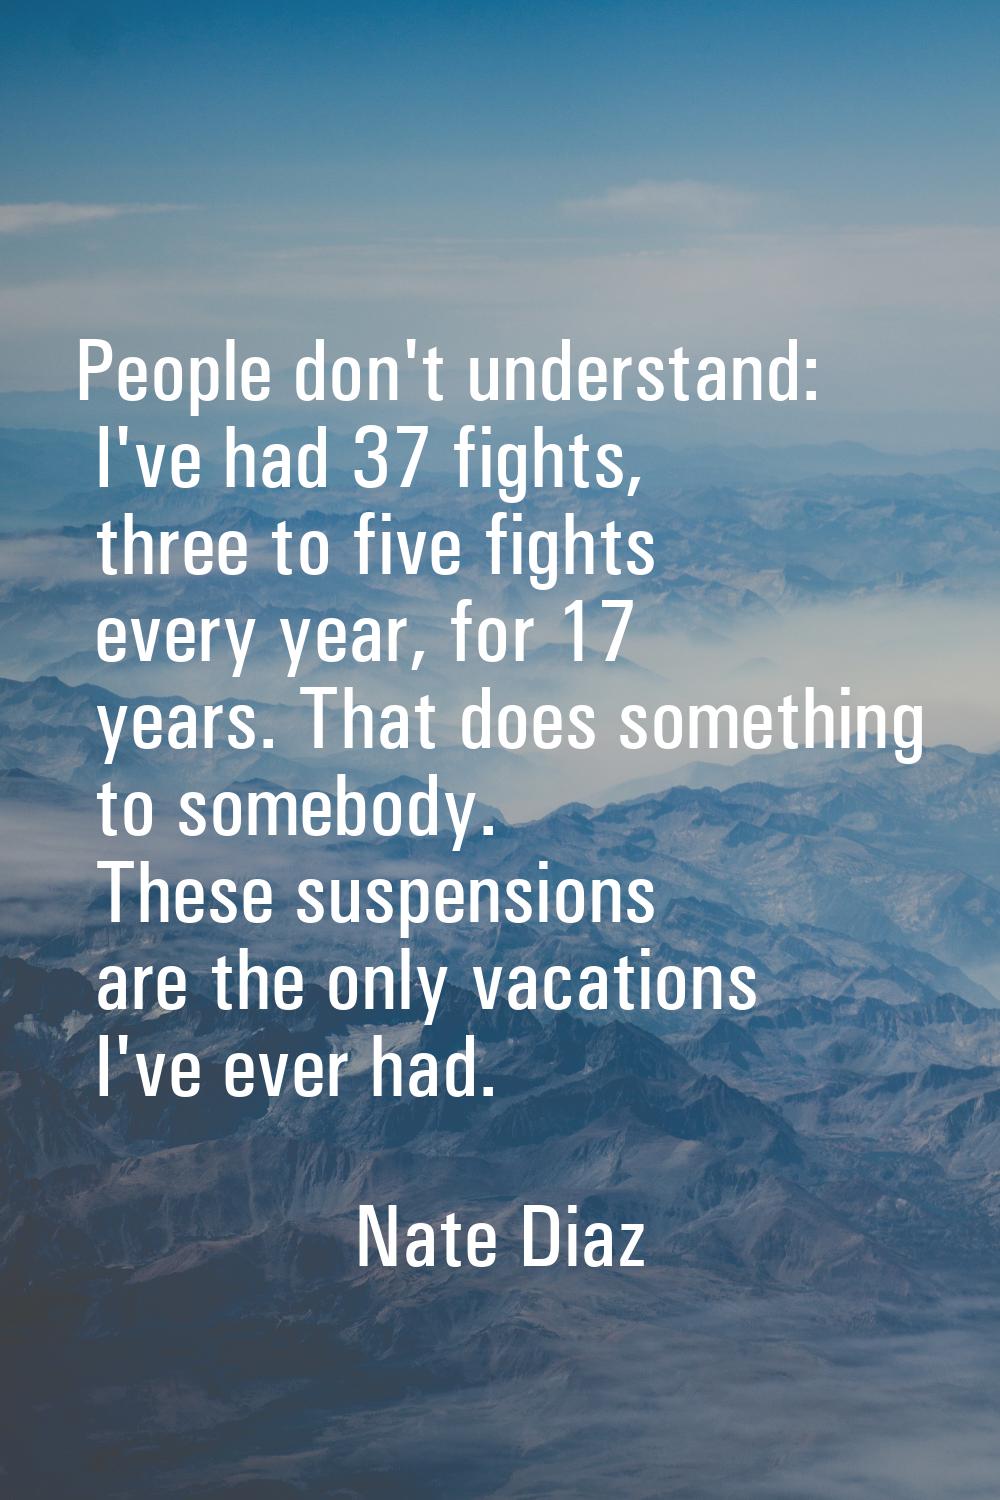 People don't understand: I've had 37 fights, three to five fights every year, for 17 years. That do